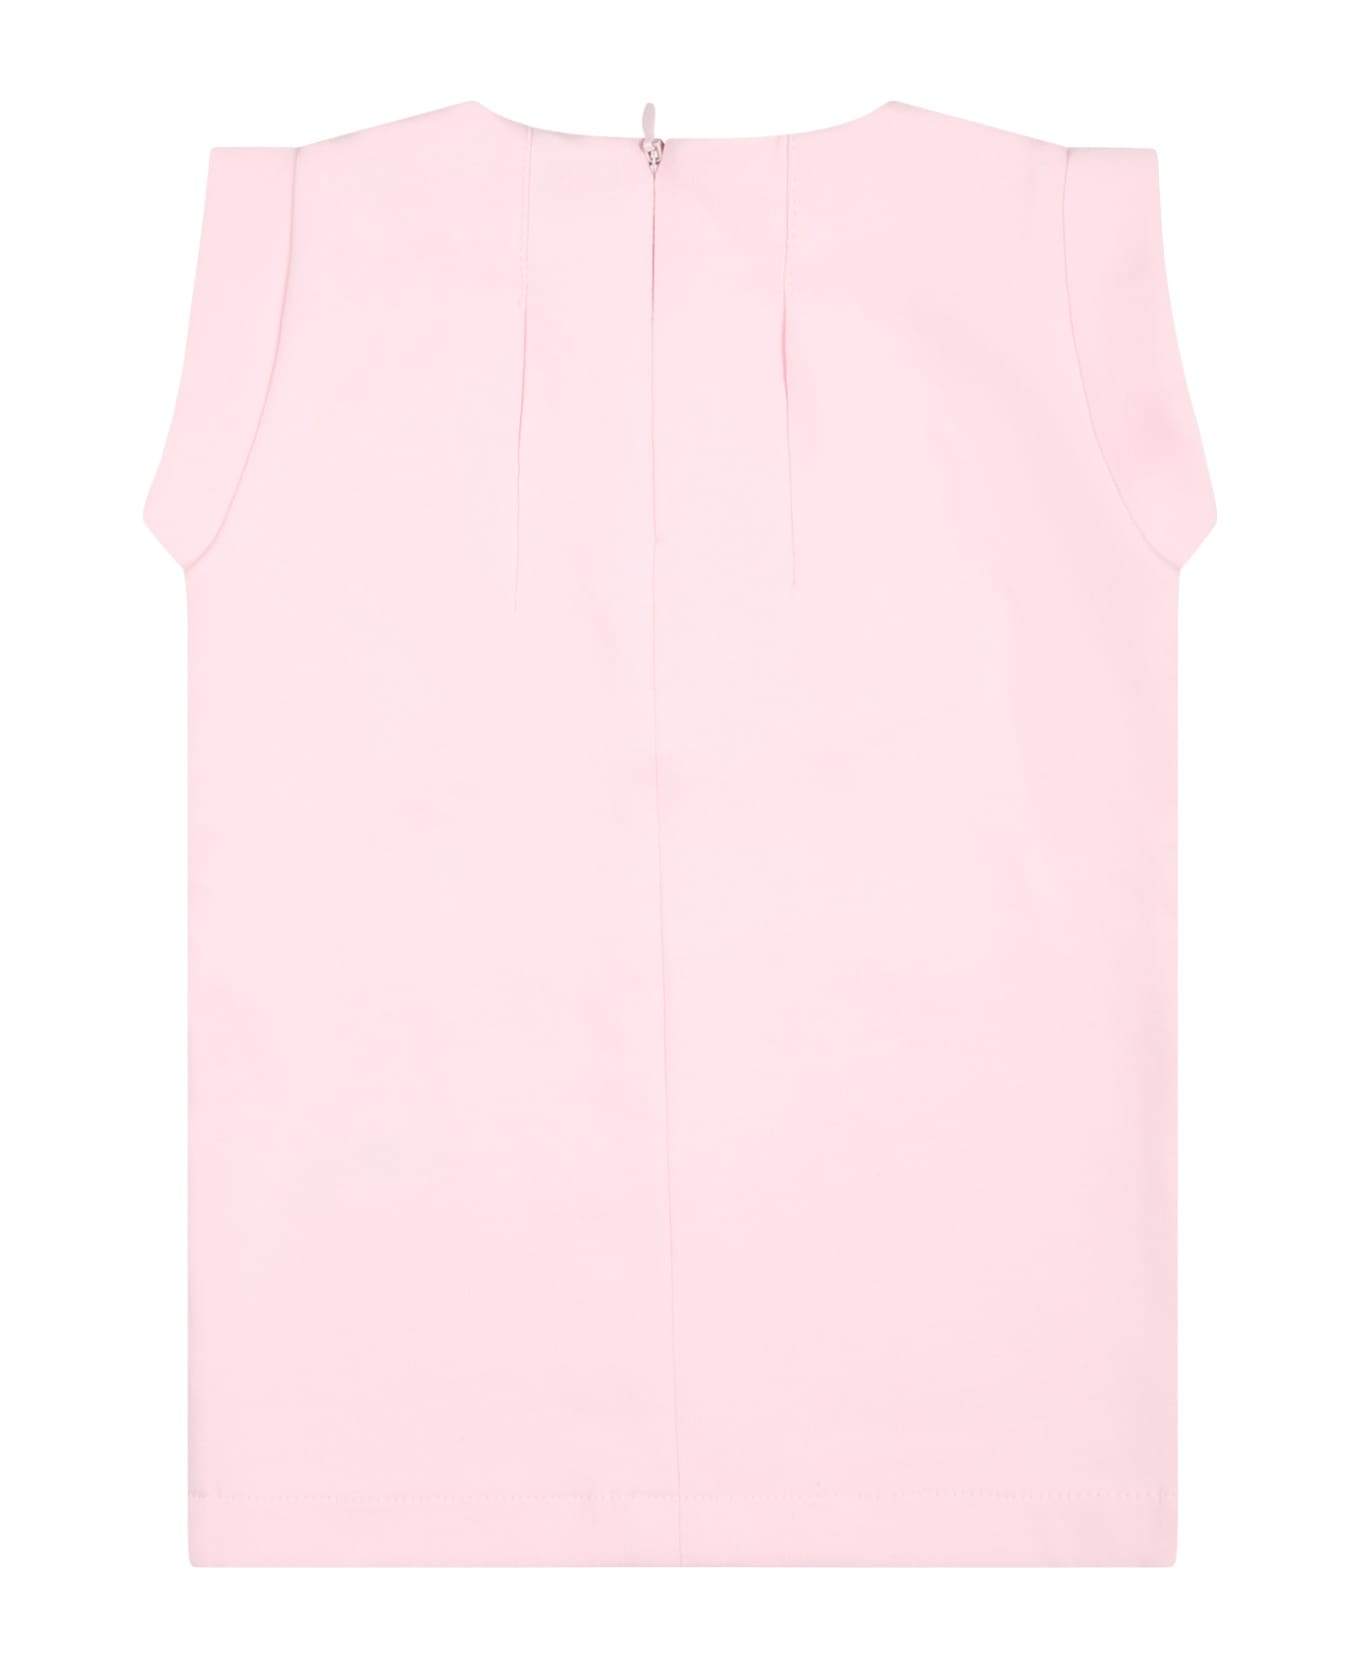 Karl Lagerfeld Kids Pink Dress For Girl With Logo - Pink